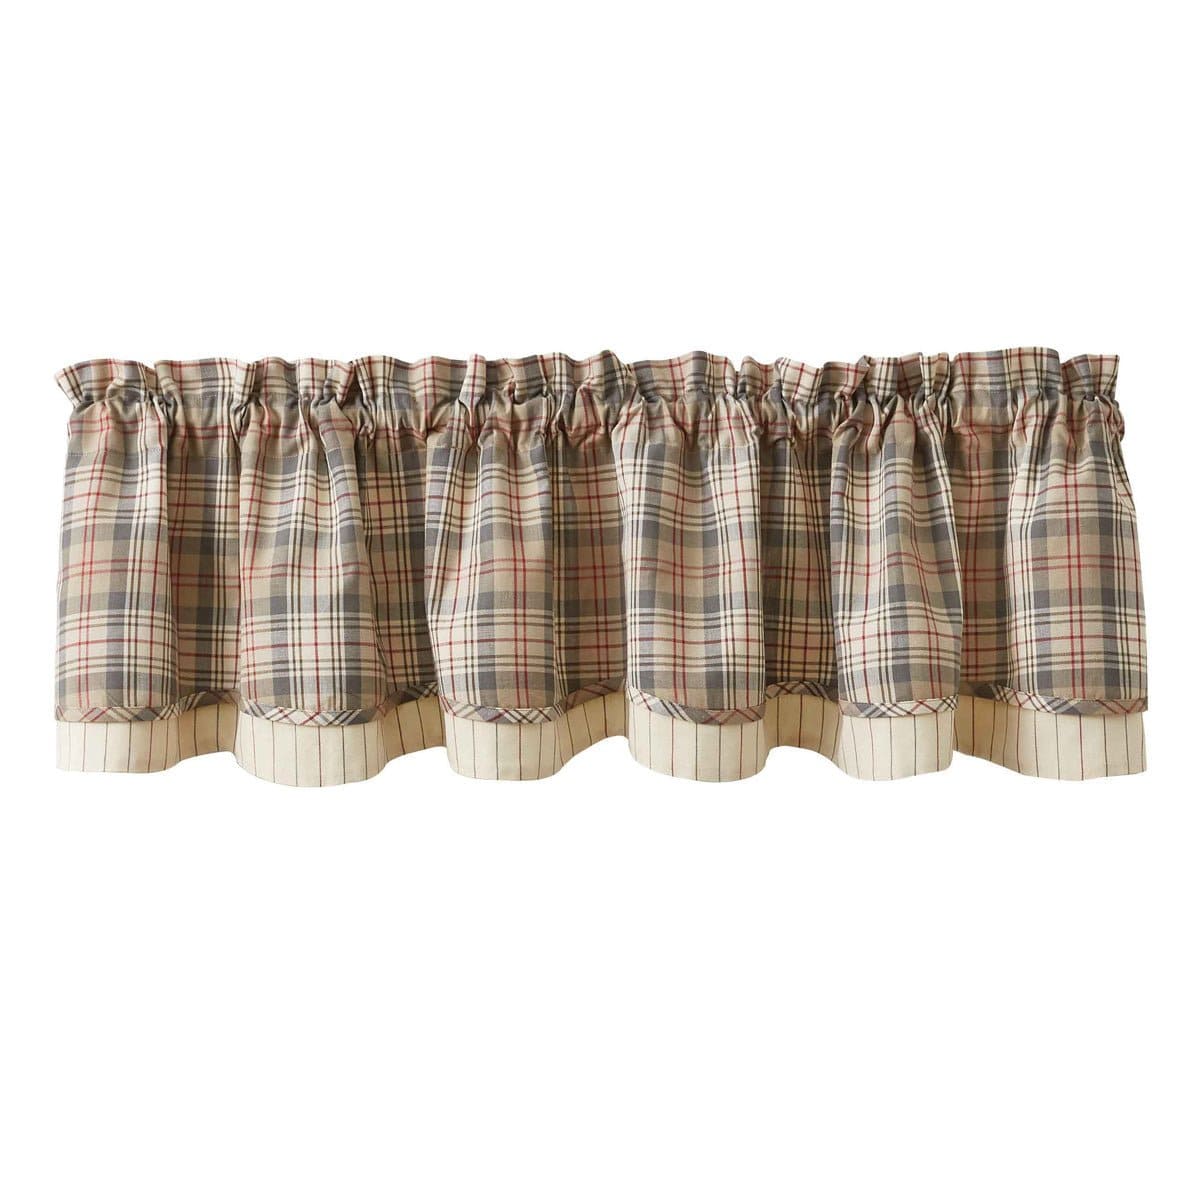 gentry layered Valance Lined-Park Designs-The Village Merchant